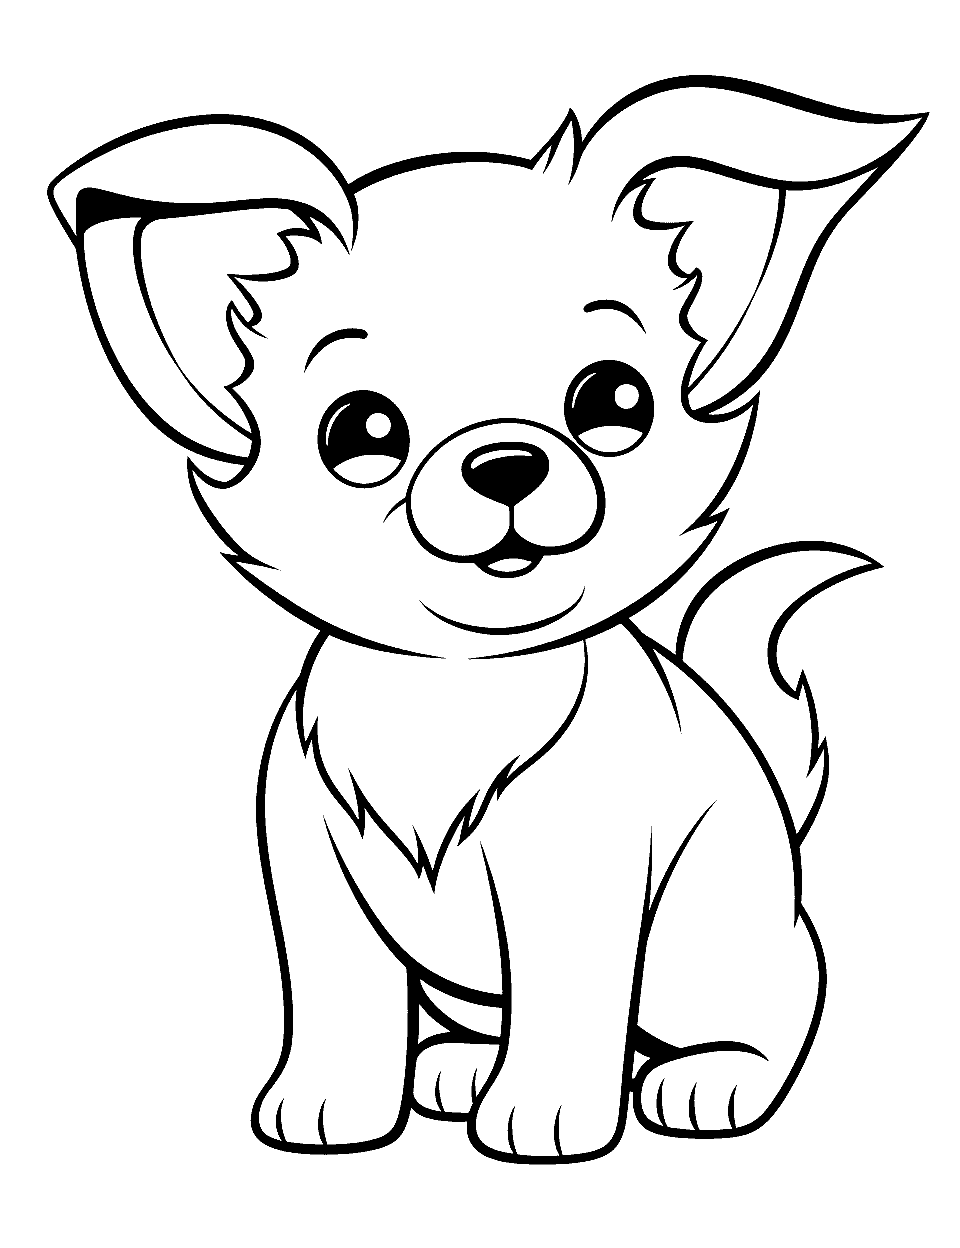 Easy and Adorable Simple Corgi Outline Puppy Coloring Page - A simple, easy-to-color outline of a Corgi puppy.